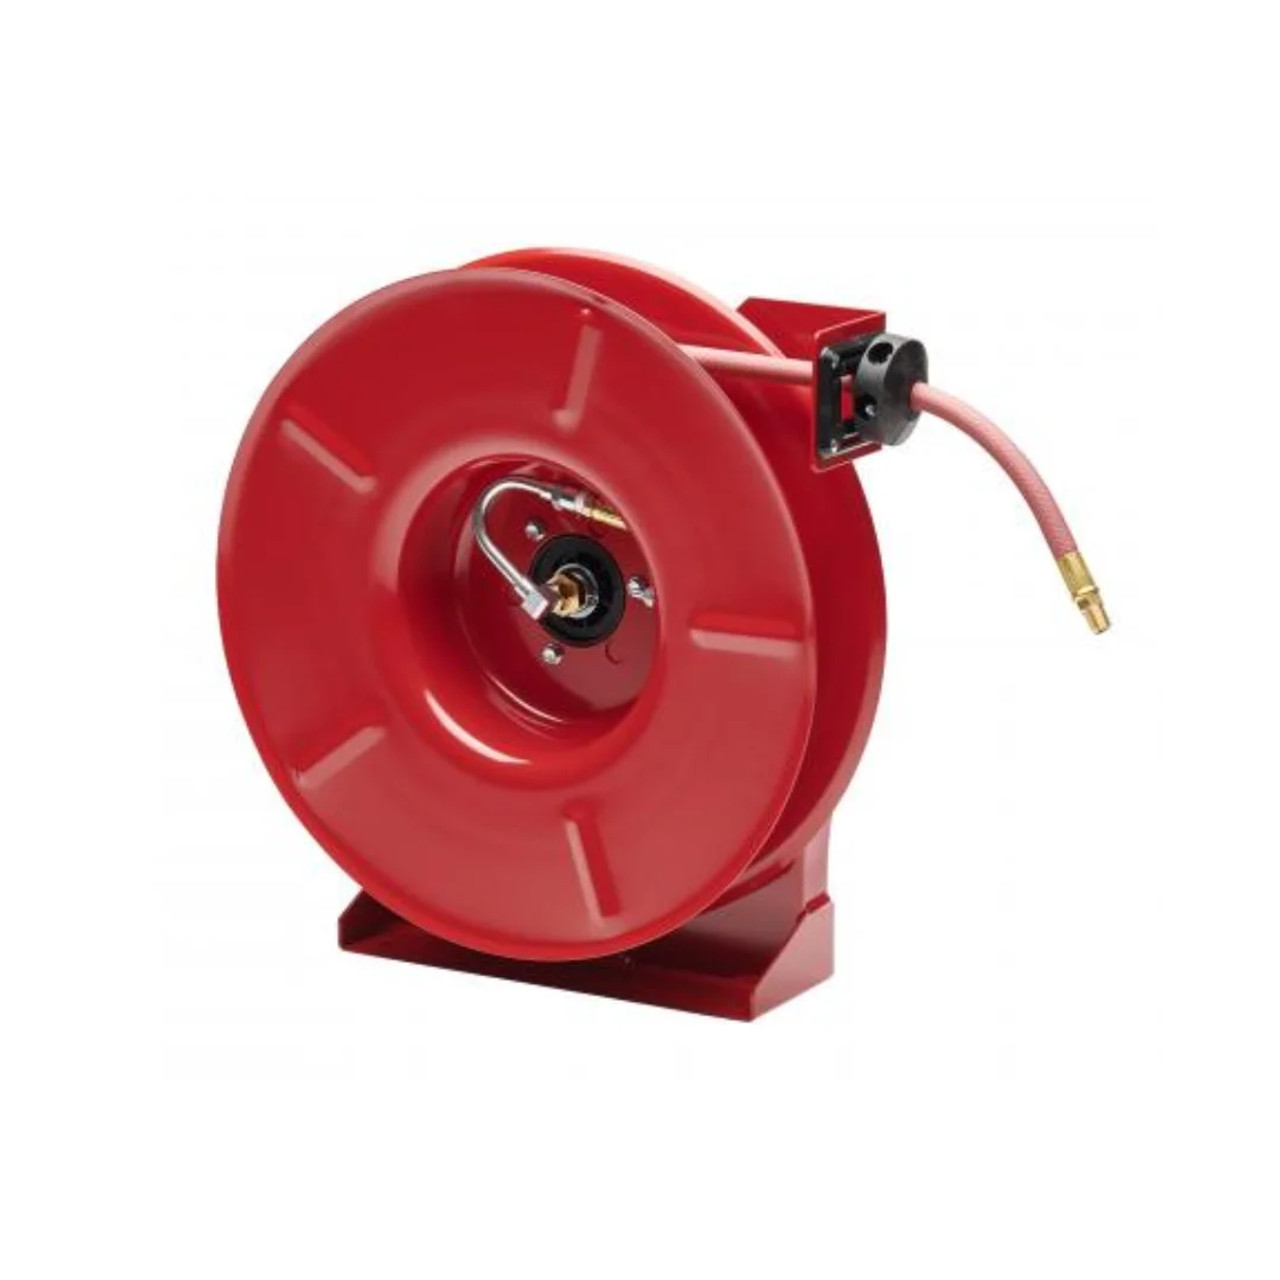 Reelcraft 5650 Olp Air/Water With Hose, 300 Psi Hose Reel, 3/8 X 50Ft Hose